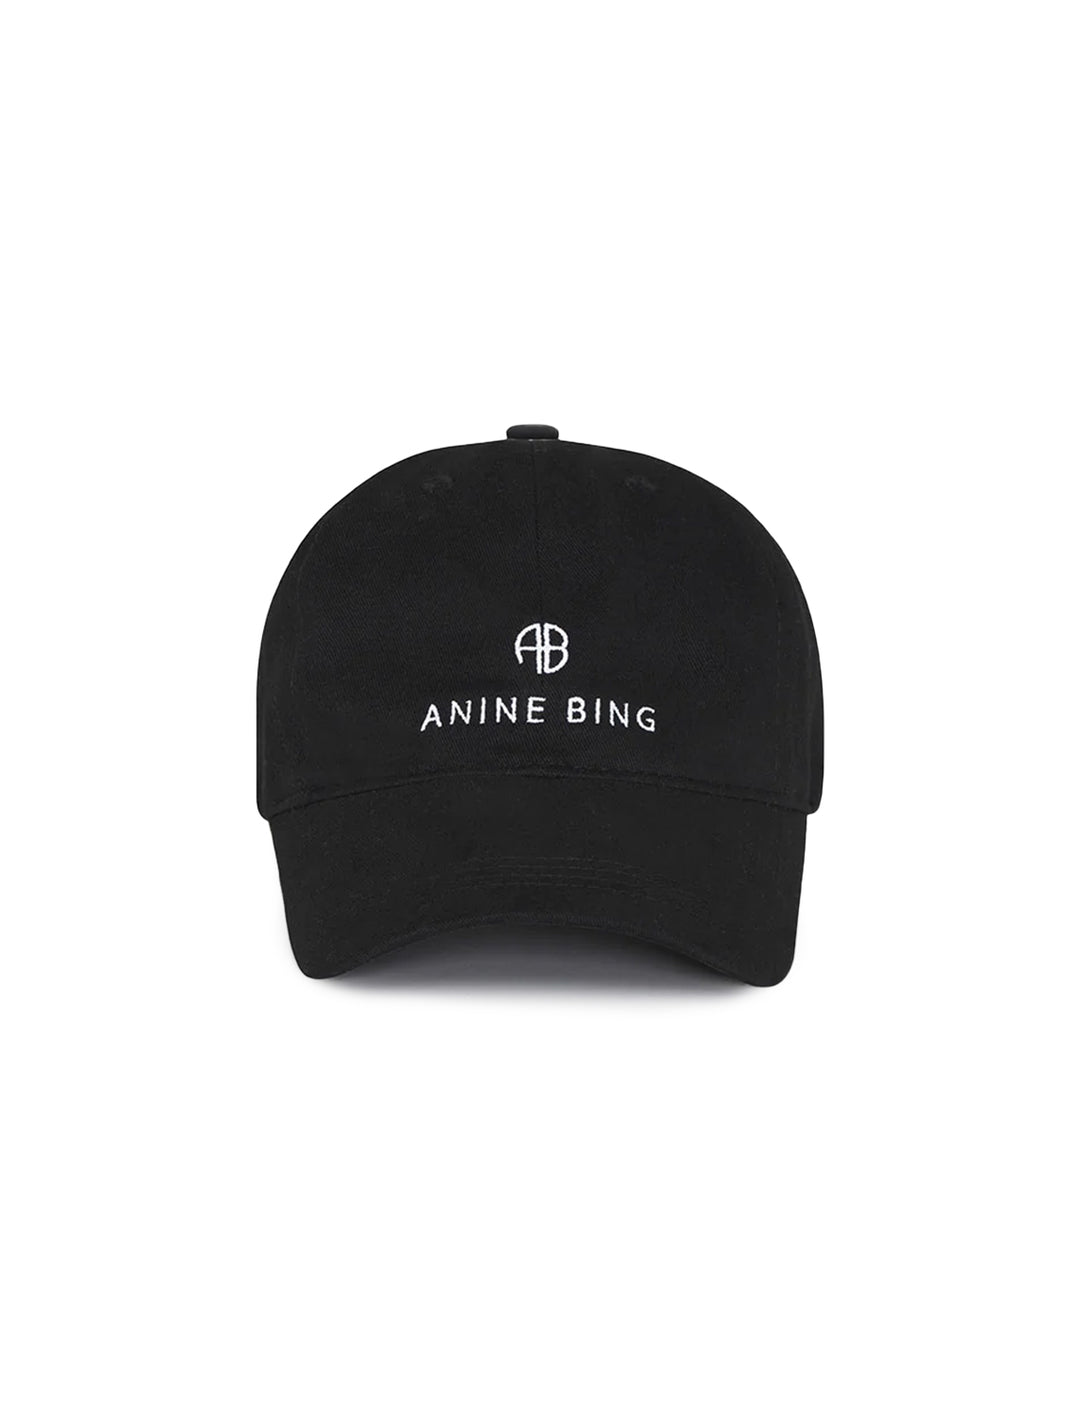 Front view of Anine Bing's jeremy baseball cap in black.